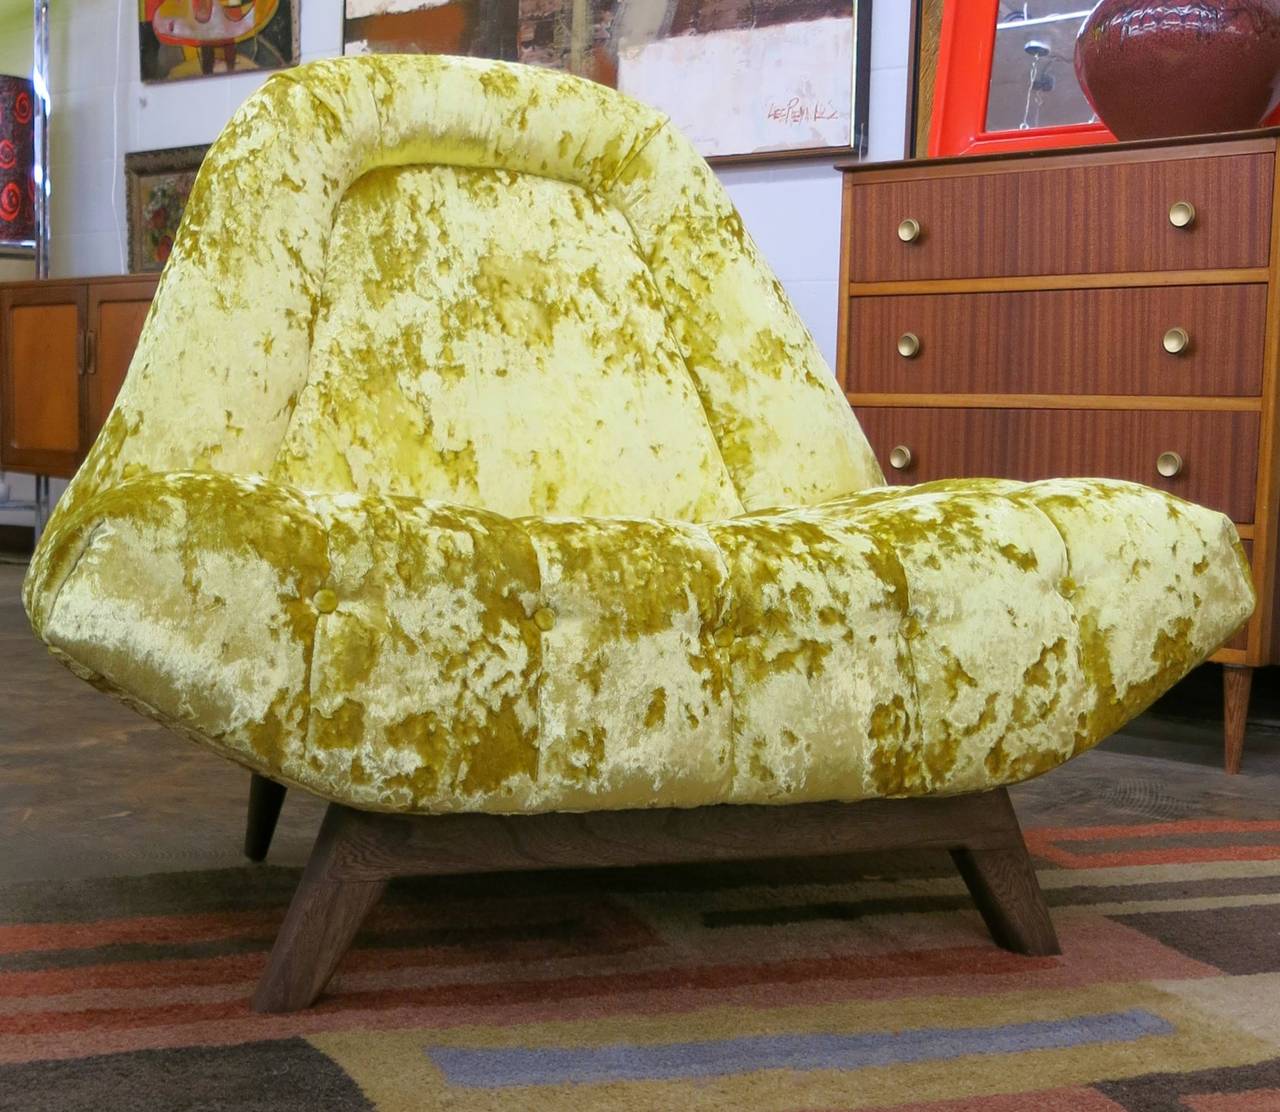 This Mid-Century Modern Adrian Pearsall gondola chair has been reupholstered in an acid yellow heavy crushed velvet reminiscent of the psychedelic 1960s. The seat is heavily tufted and the walnut legs have been refinished.